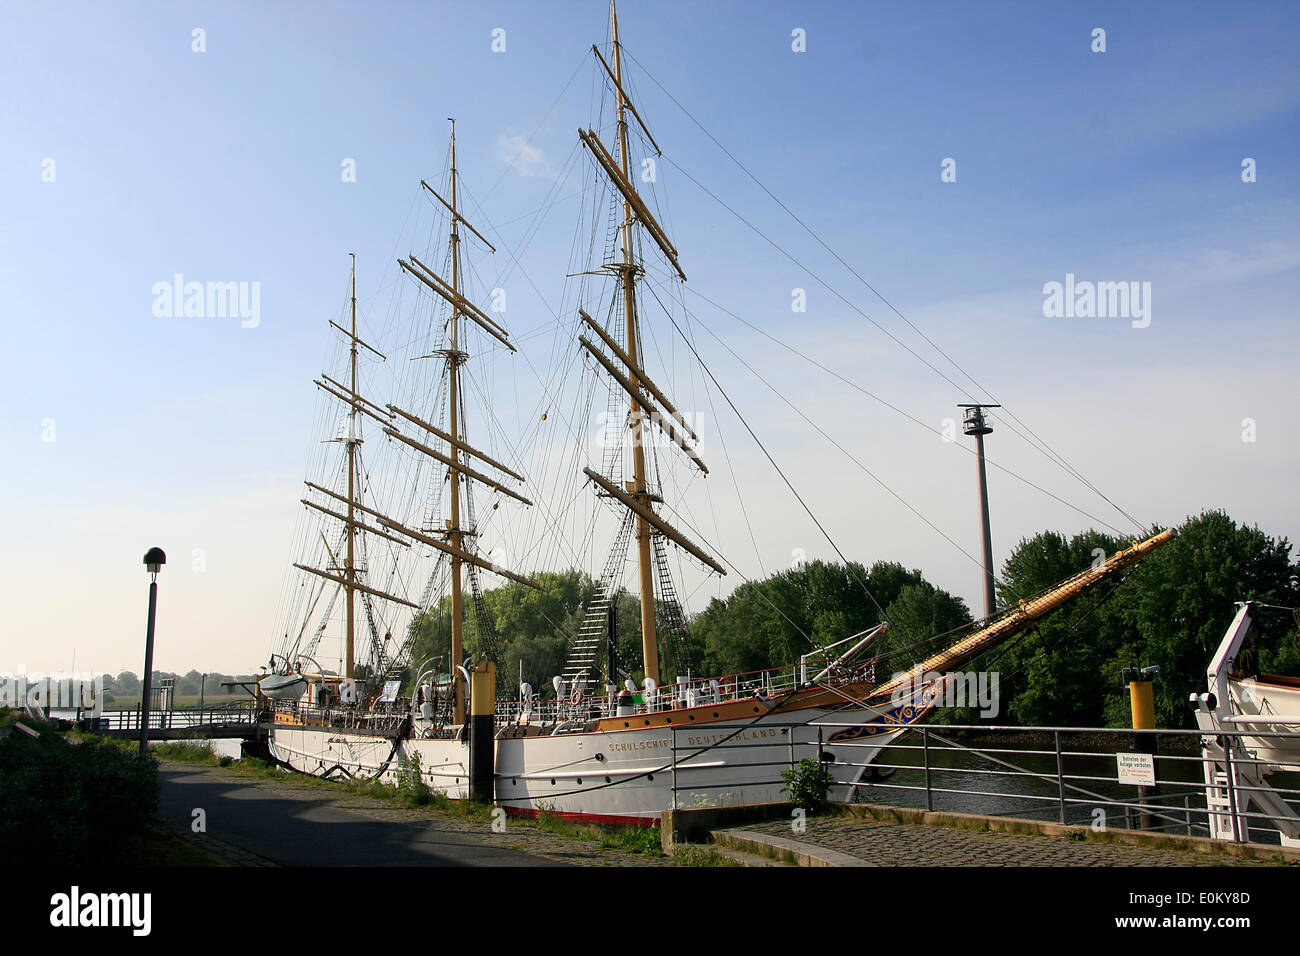 The training ship Deutschland (Germany) is a three-master. Since 1927, there was a sailing ship of the merchant shipping. Now it is a maritime memorial in Vegesack. Photo: Klaus Nowottnick Date: Mai 10, 2914 Stock Photo